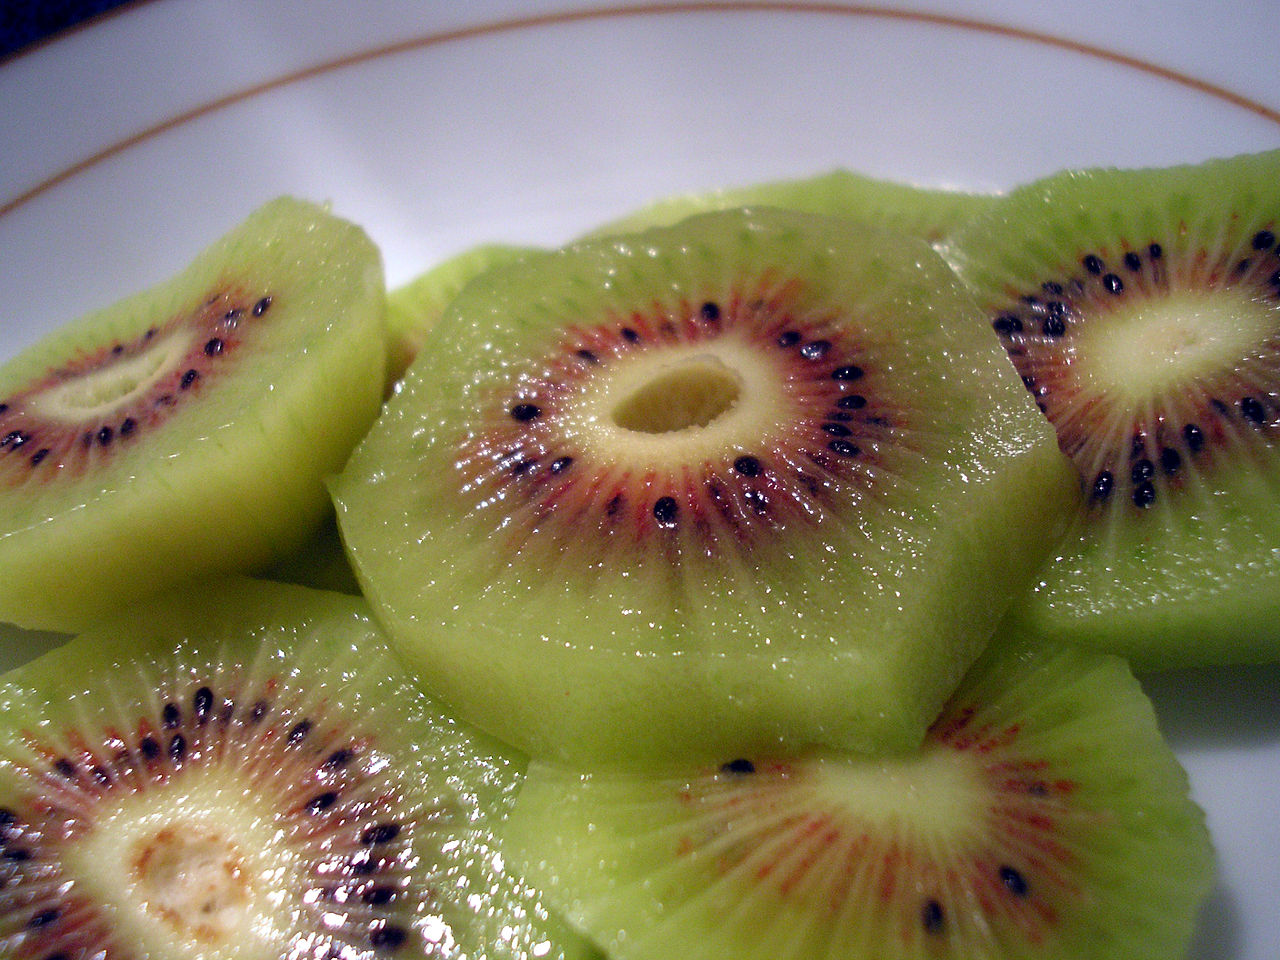 Download File:Red kiwi fruit slices.jpg - Wikimedia Commons